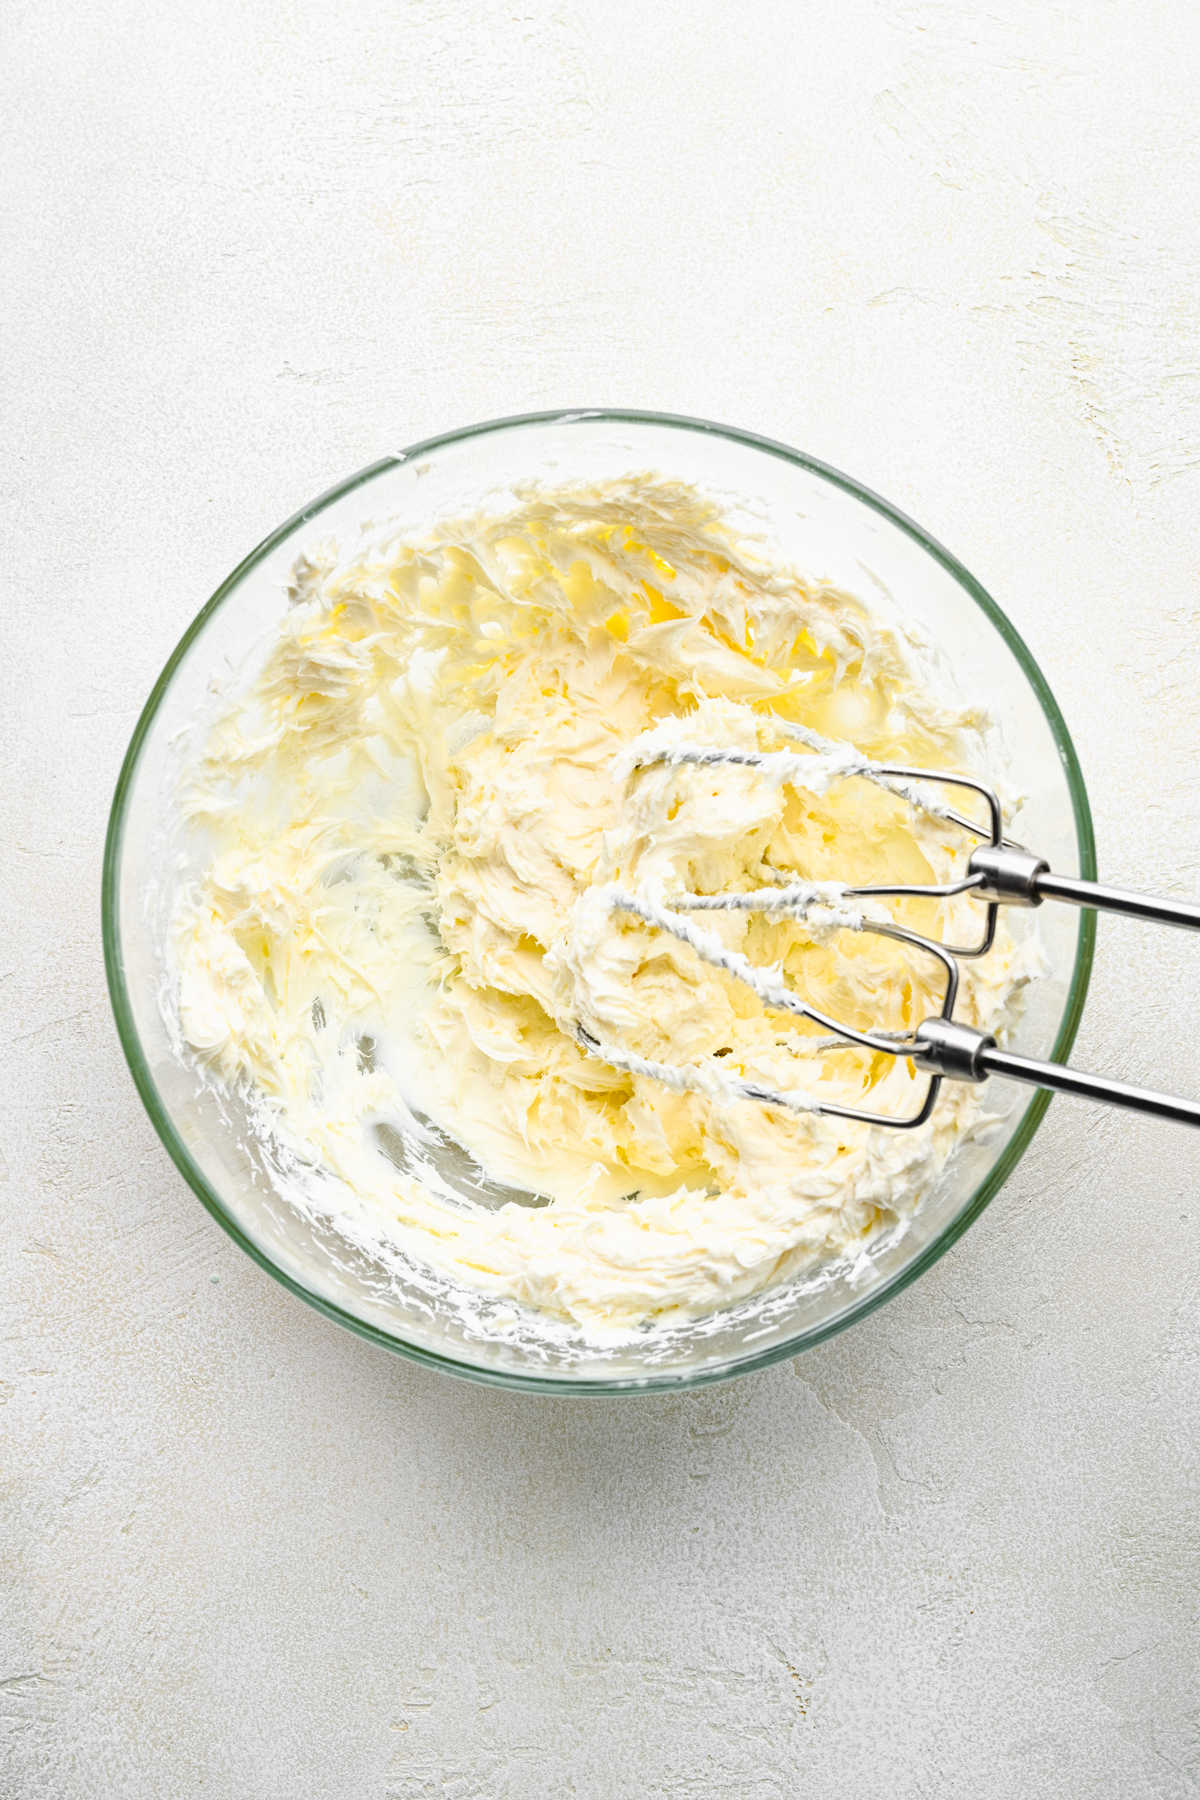 A hand mixer beating cream cheese and butter together in a glass mixing bowl. 